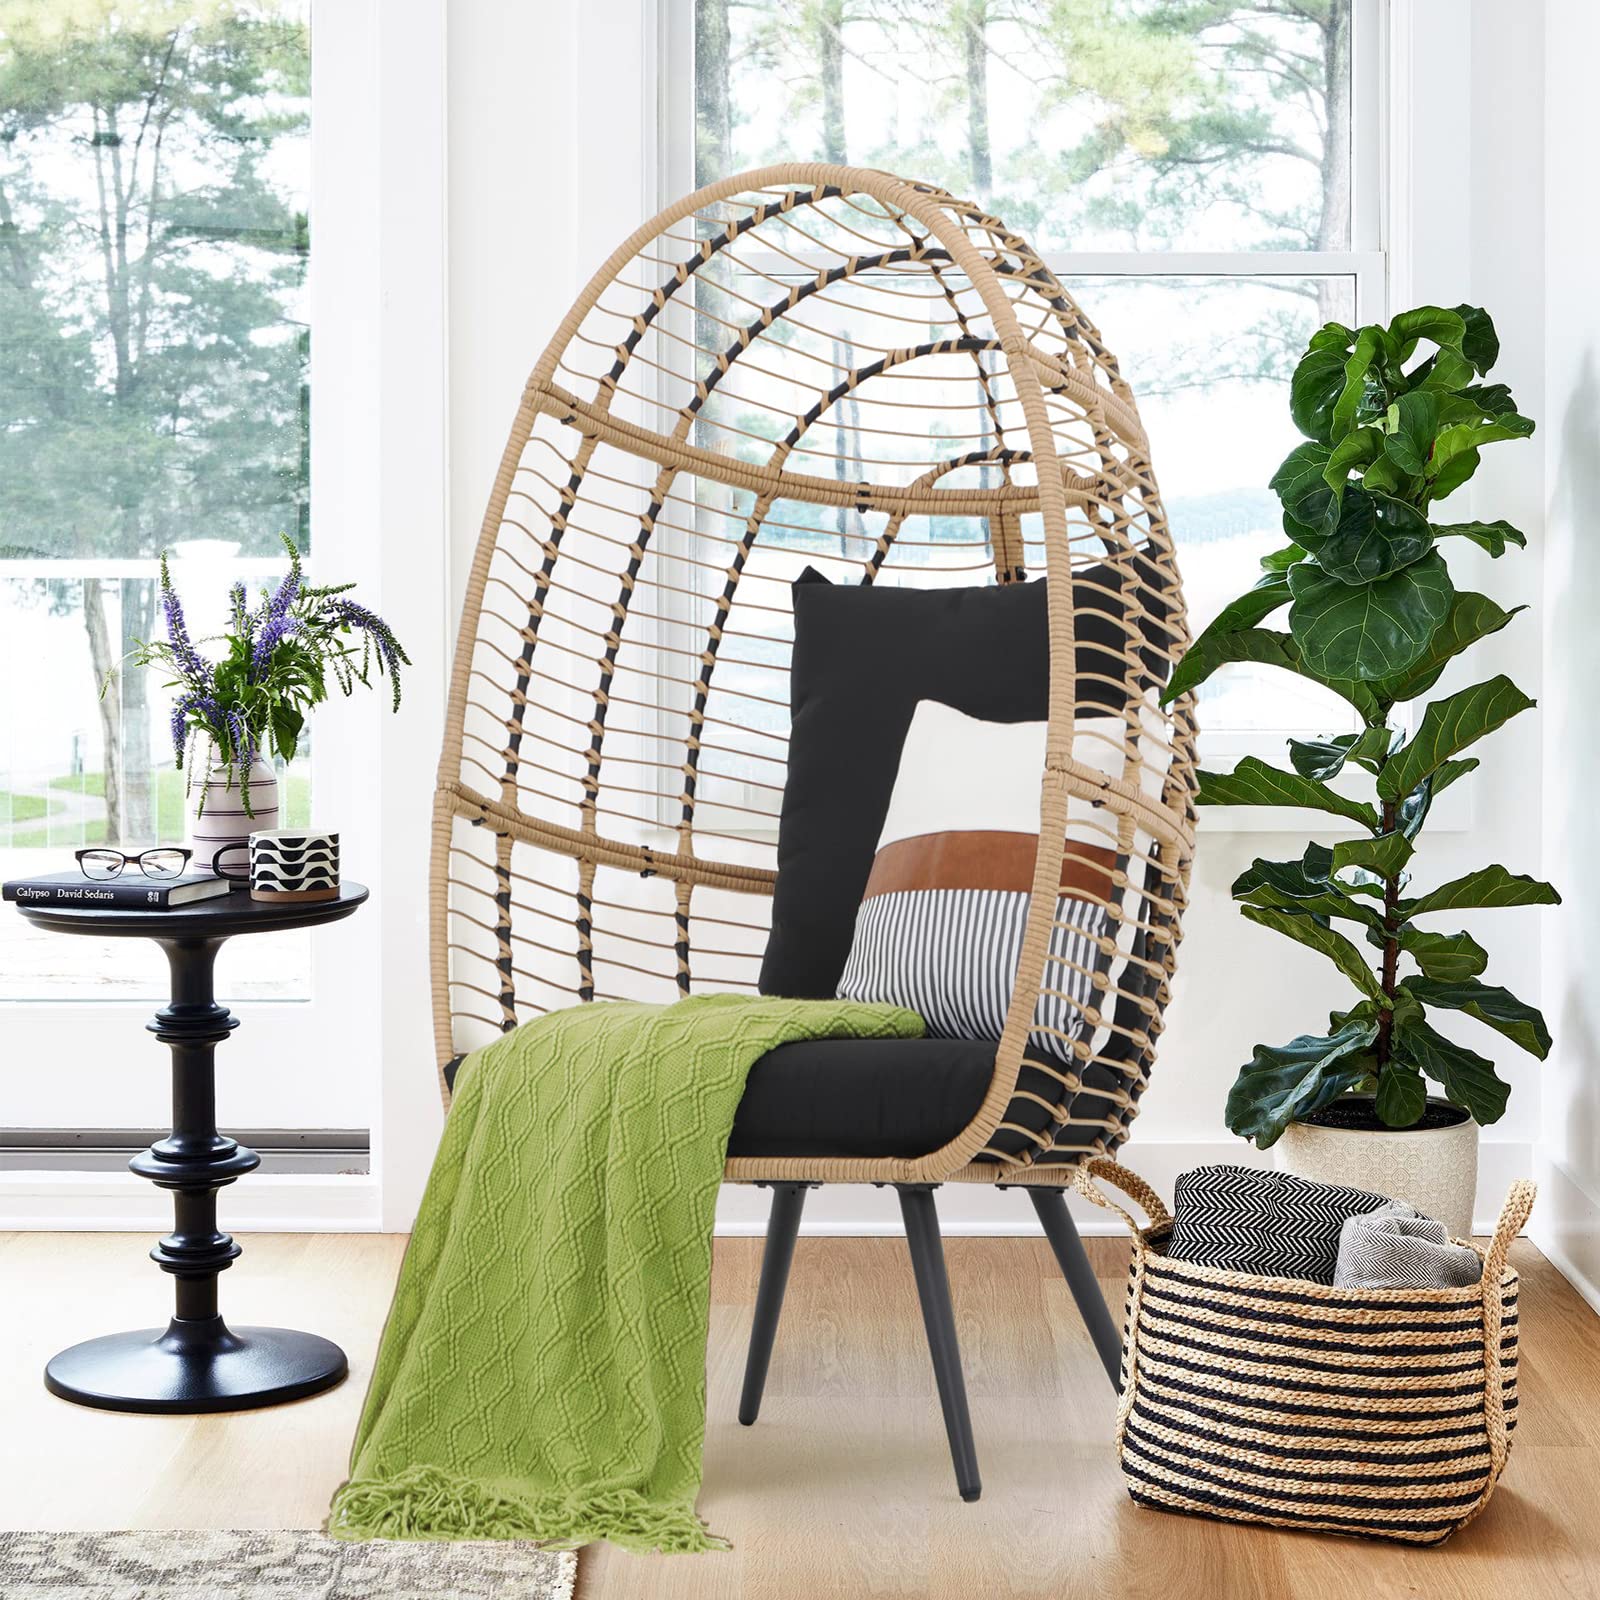 Wicker Egg Chair Rattan Lounge Chair Basket Wicker Chair for Indoor and Outdoor